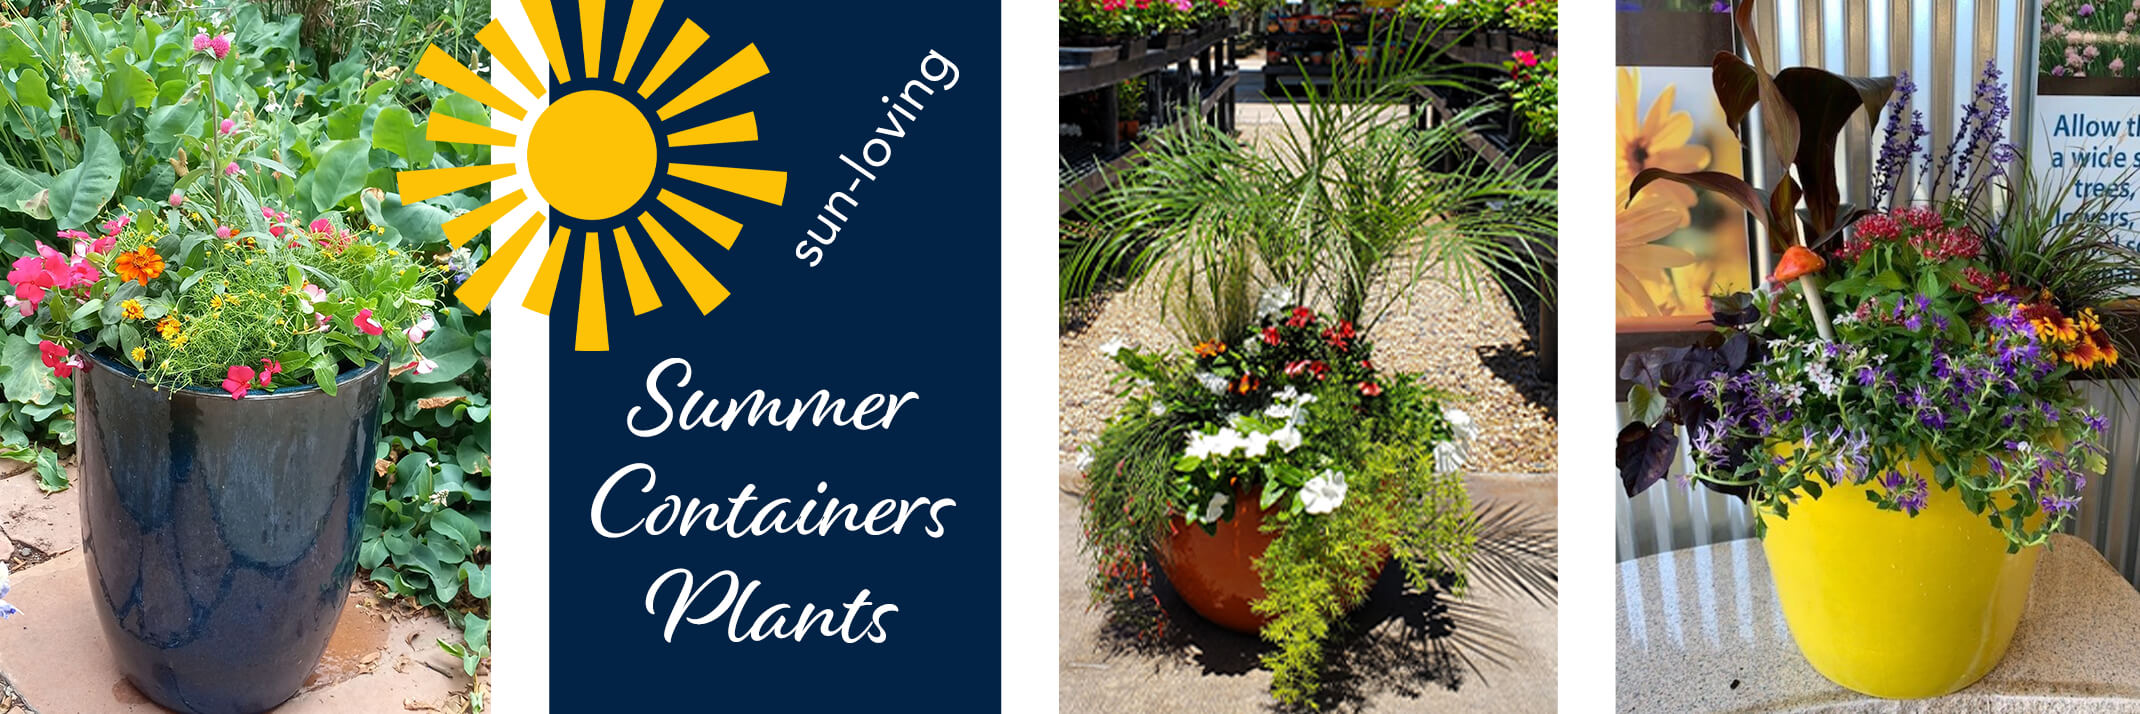 Sun-Loving Summer Container Plants - 3 different pots containing a wide variety of plants and flowers